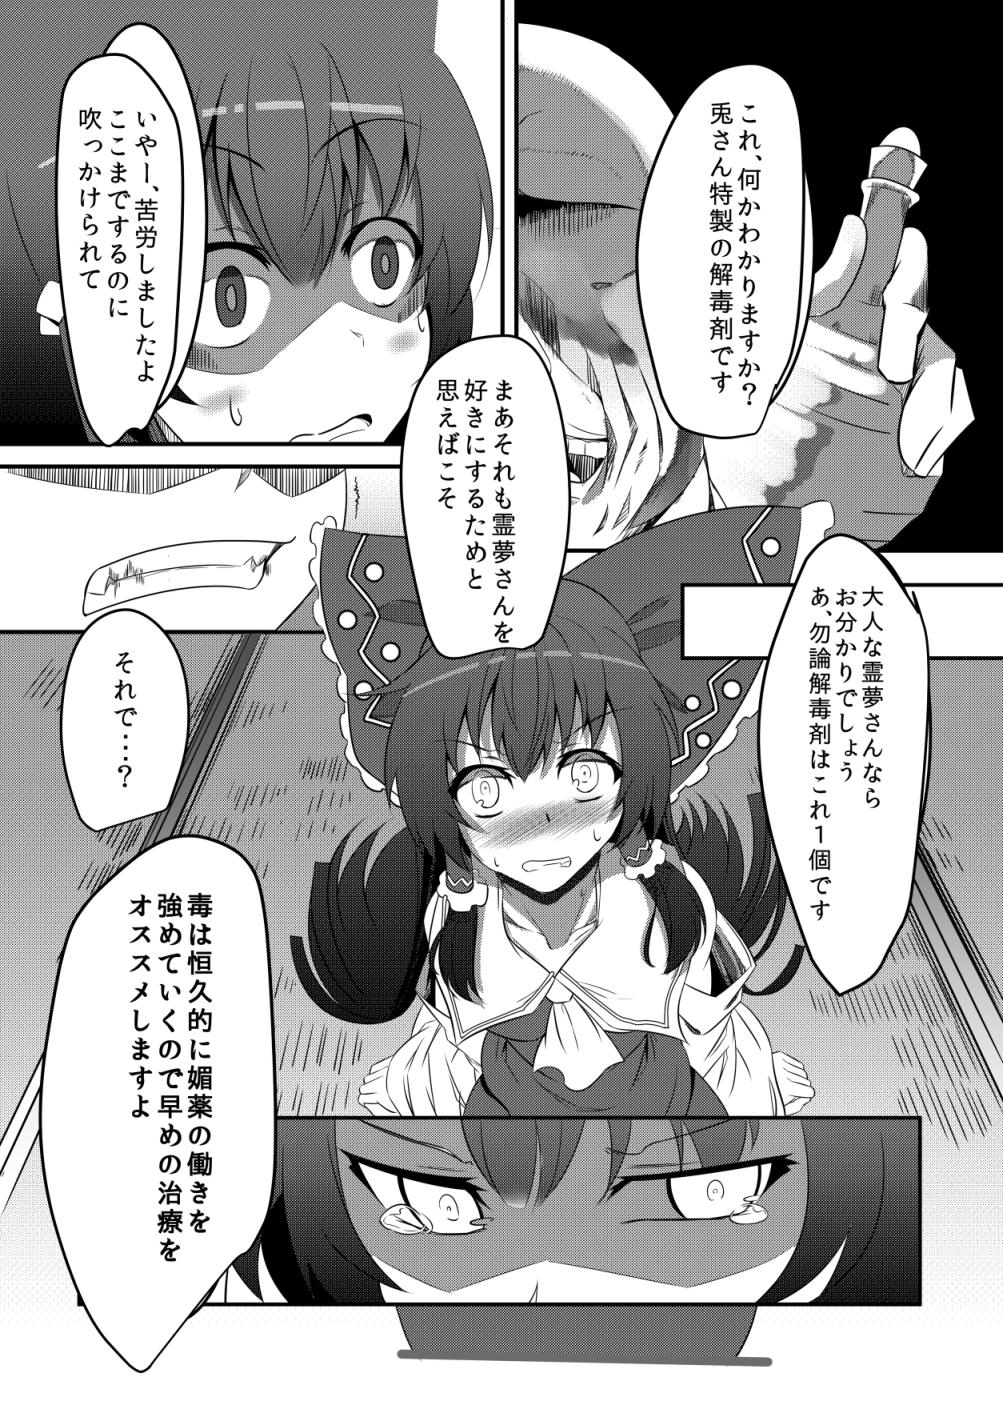 Carro M.P. Vol. 2 - Touhou project Doll - Page 7